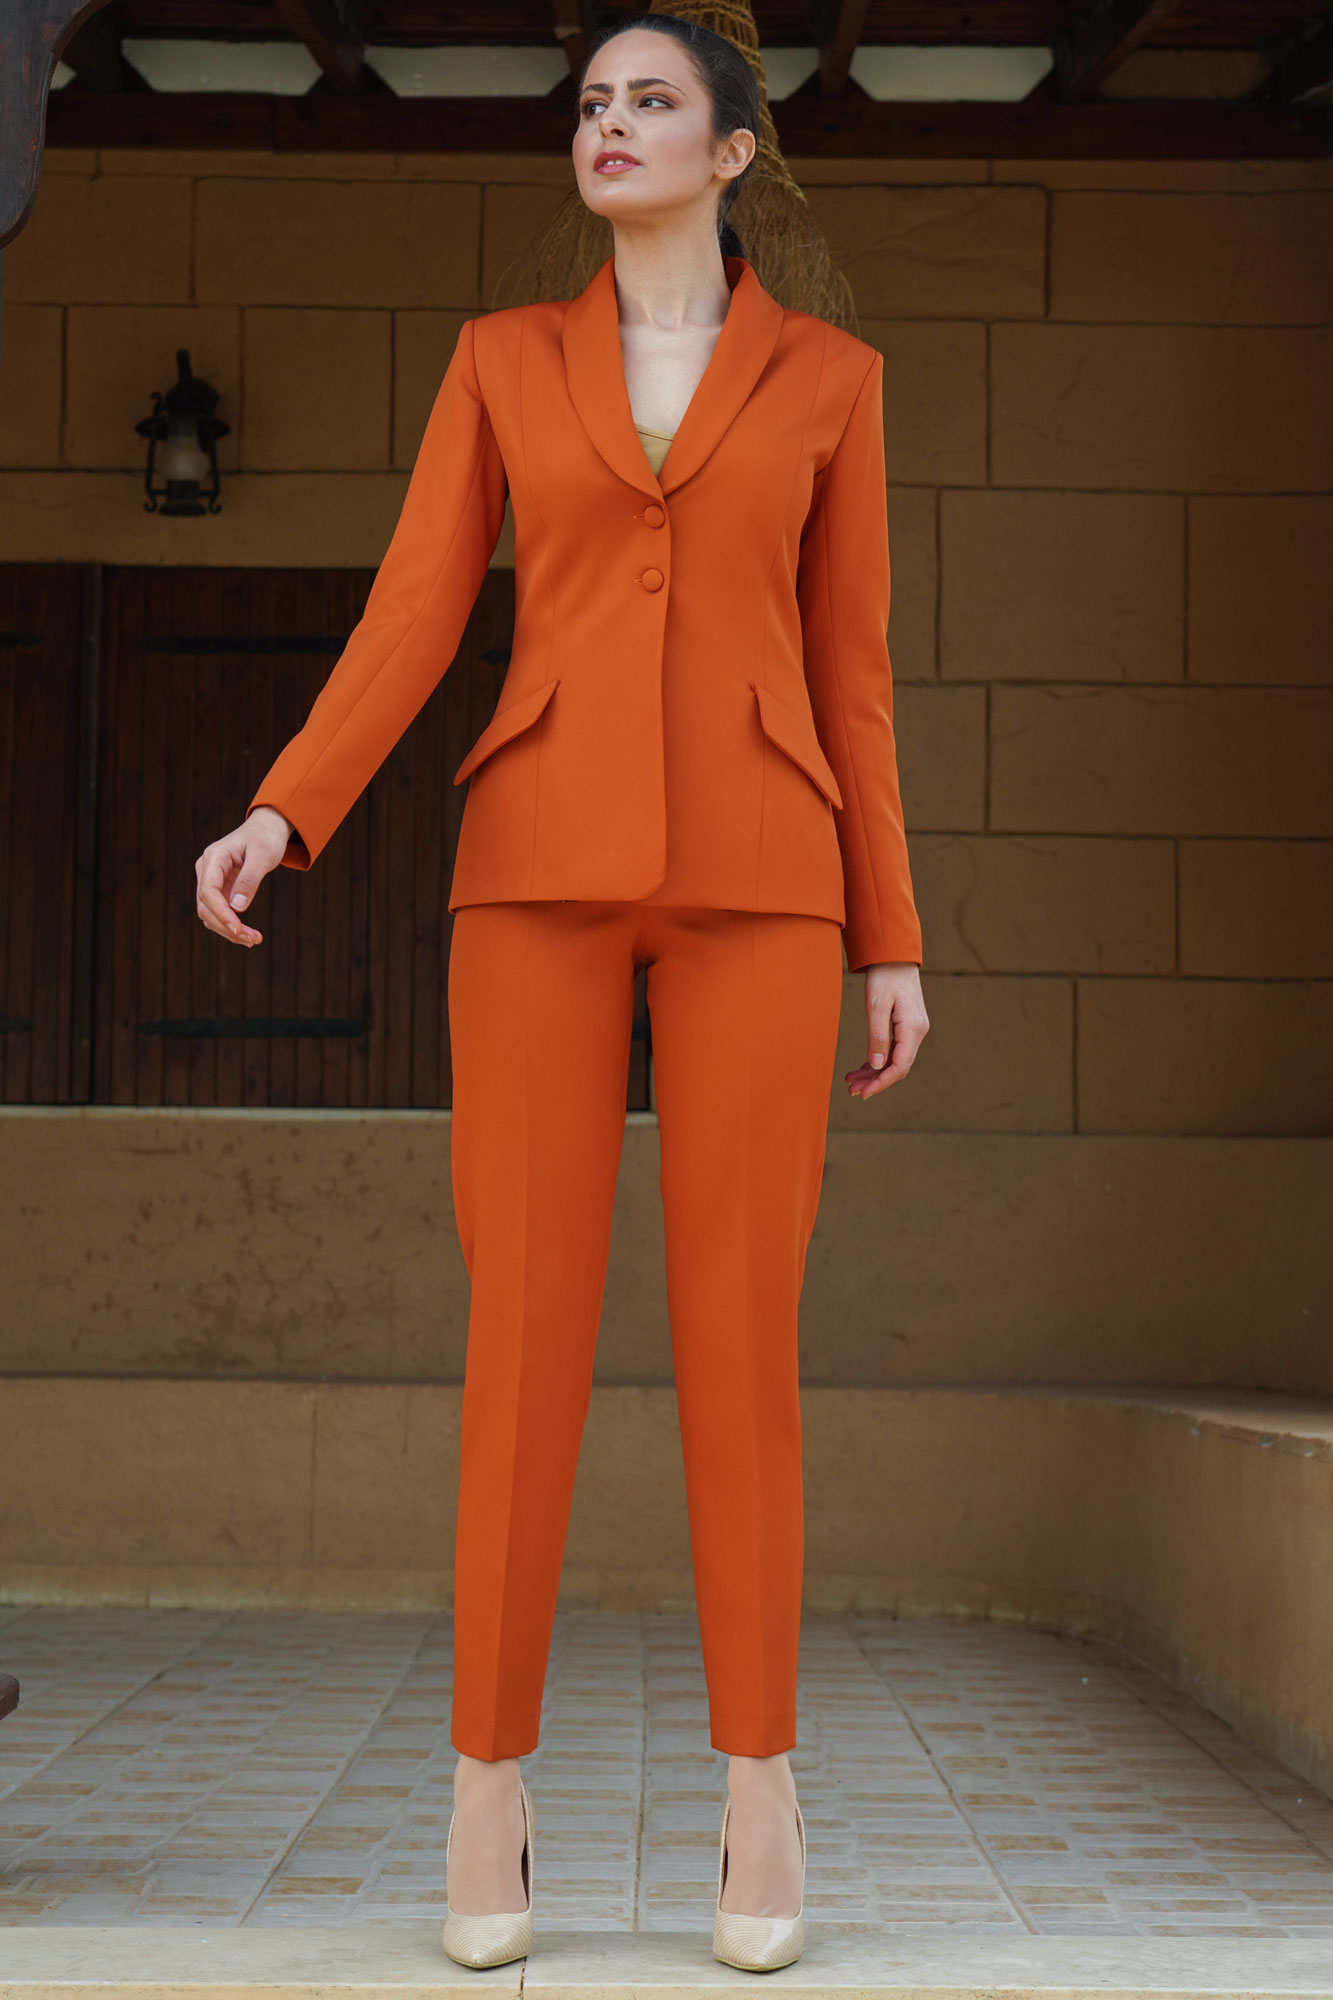 Two Pieces Orange Cinching Single Breasted Suit